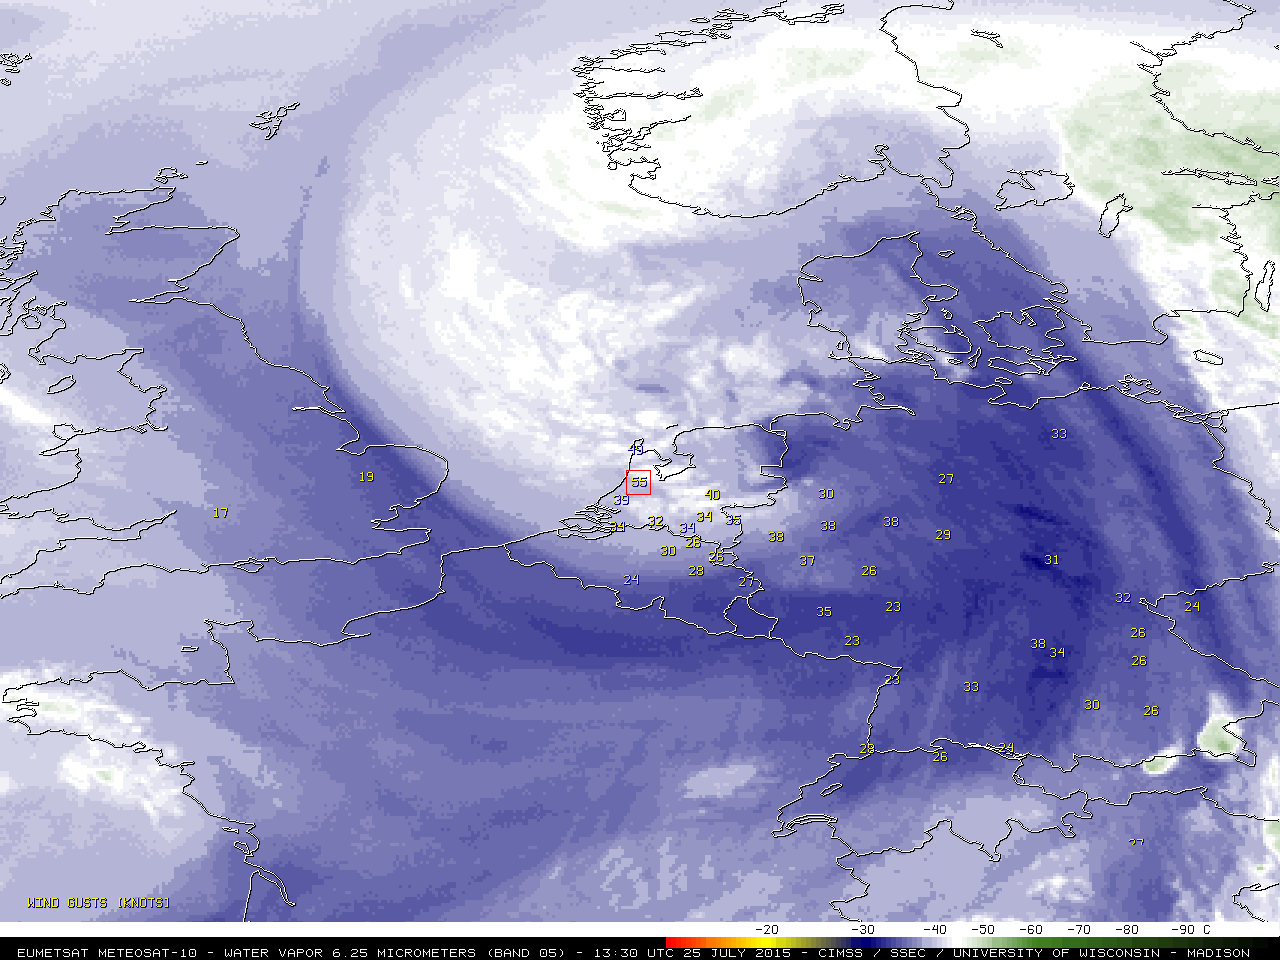 Meteosat-10 6.25  µm water vapor channel images [click to play animation]